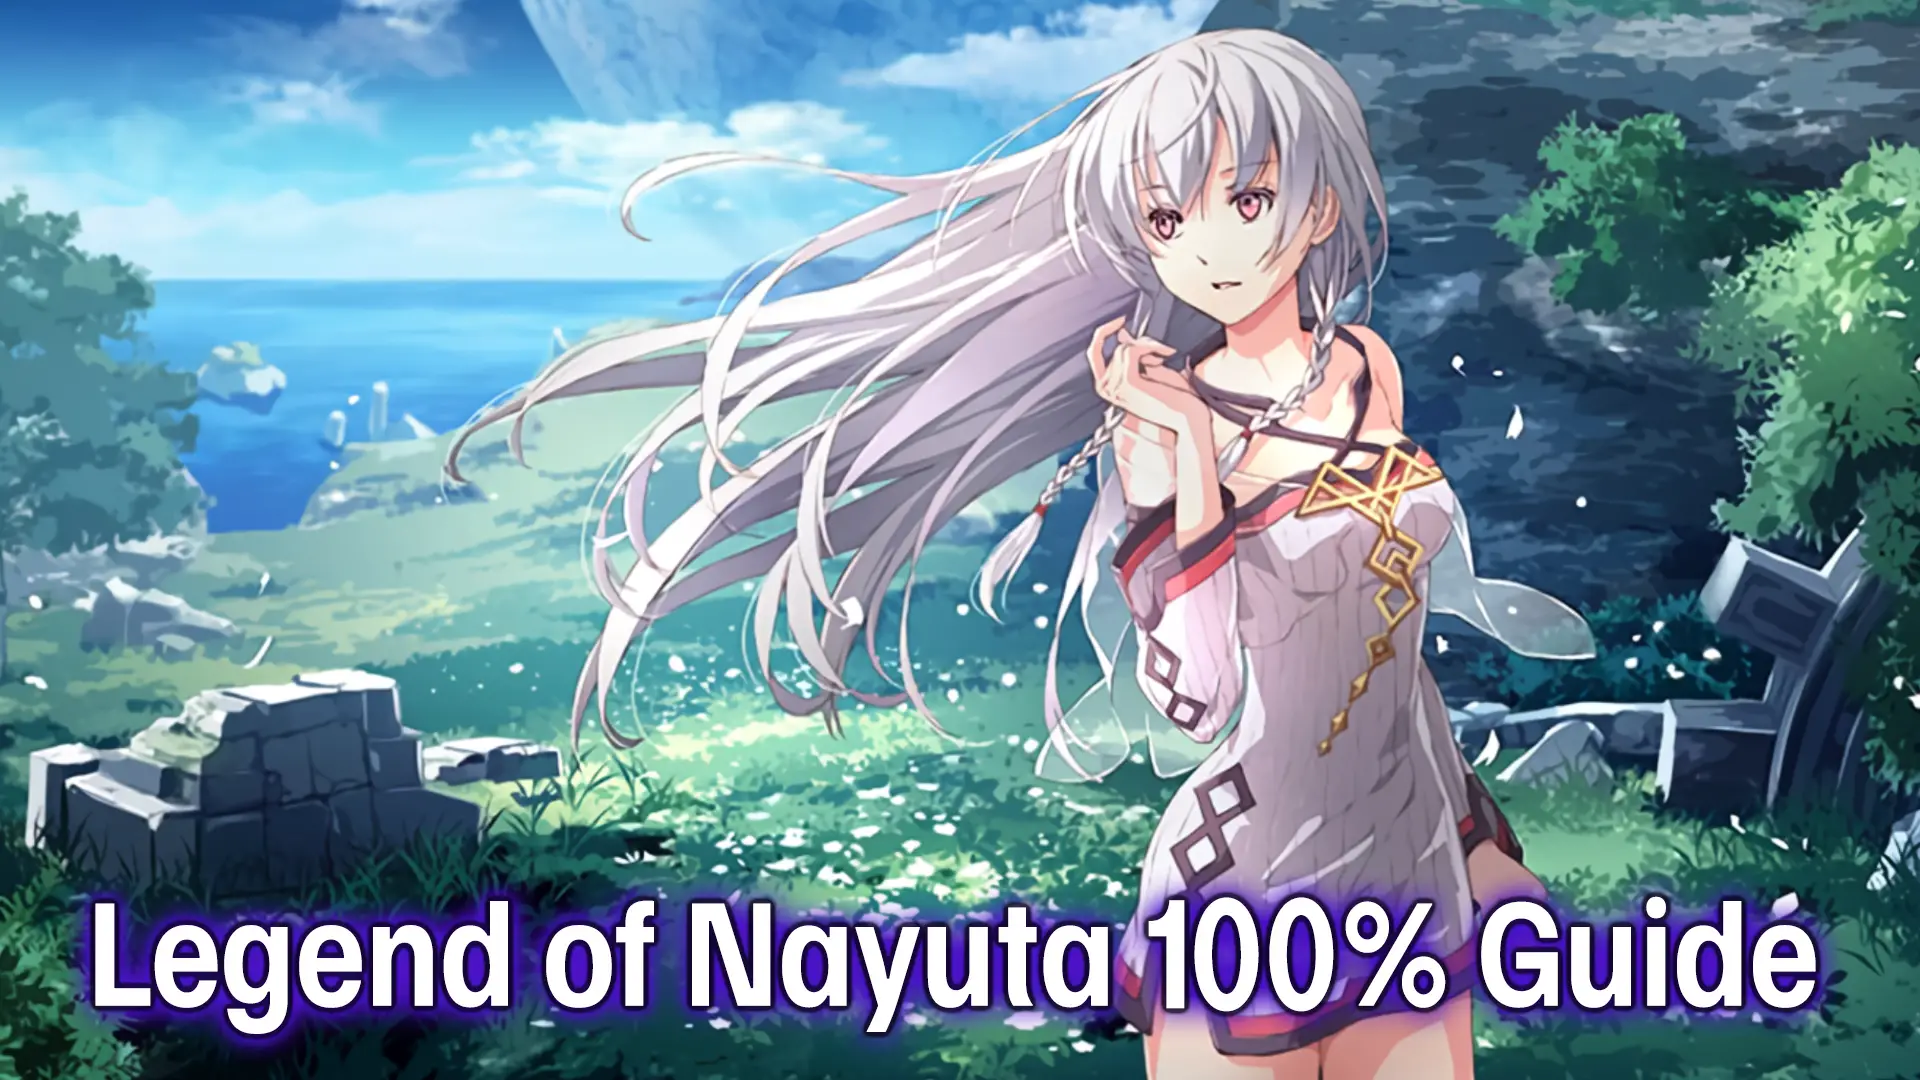 The Legend of Nayuta: Boundless Trails 100% Guide